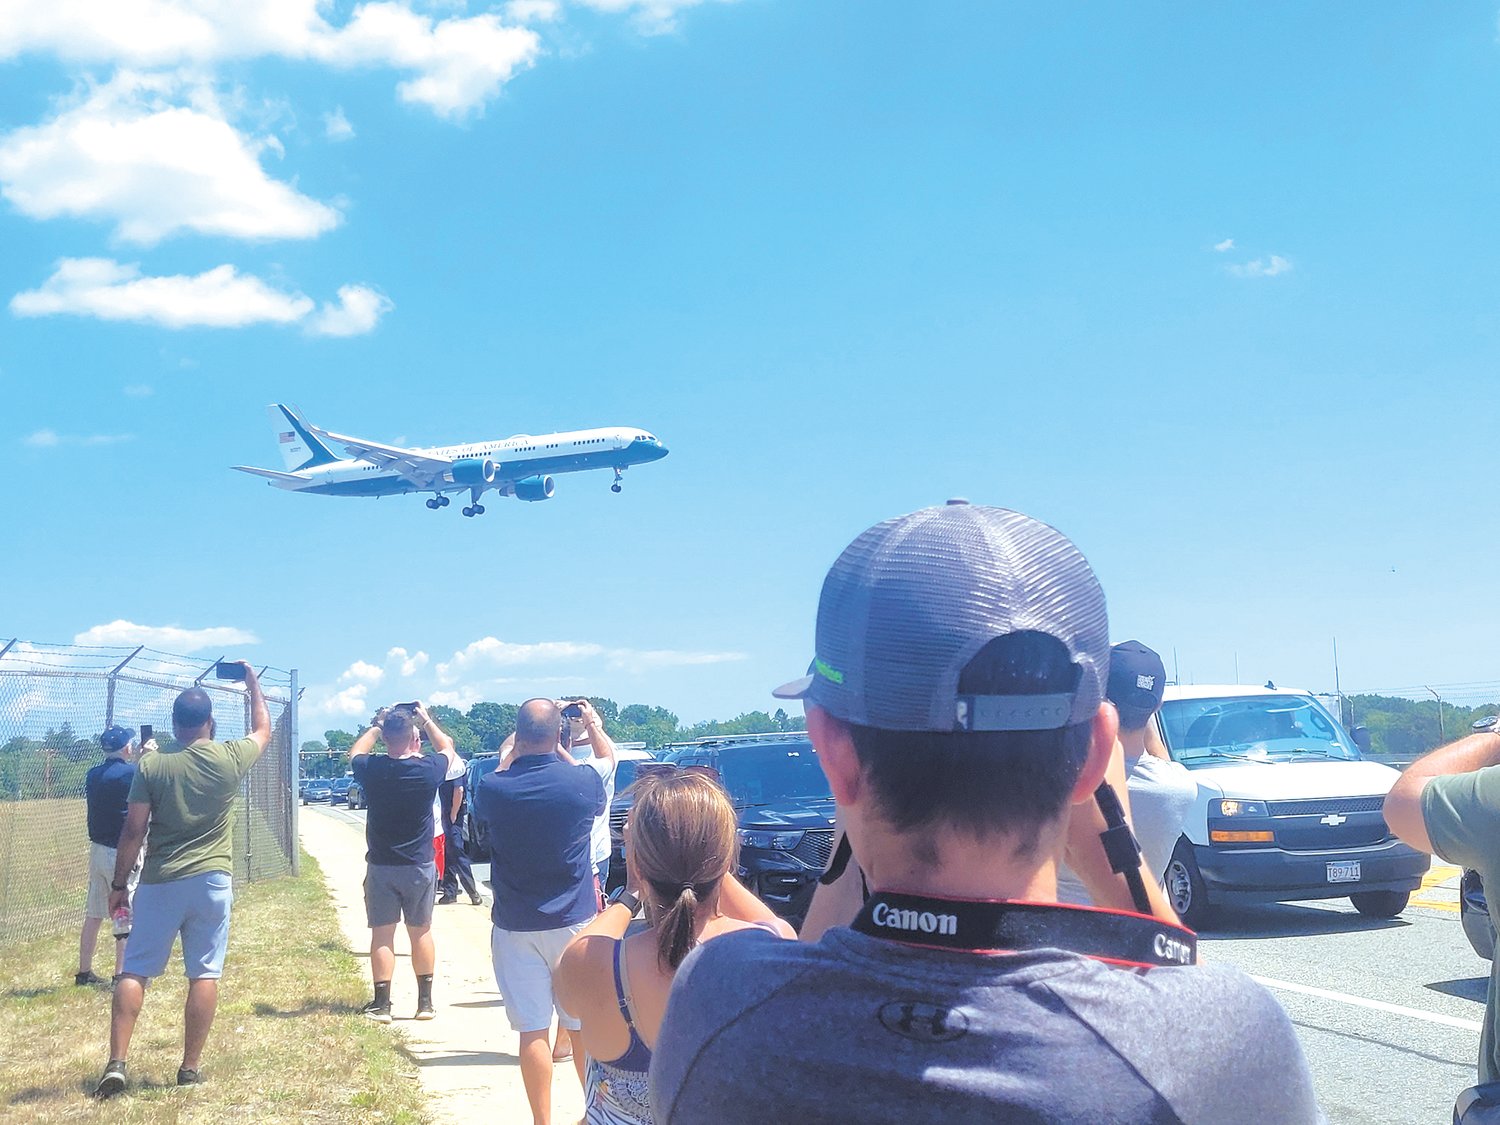 Jake Fernandes, 13, of New Bedford, gripped his camera and heavy, long telephoto lens as he jockeyed for position along Airport Road.